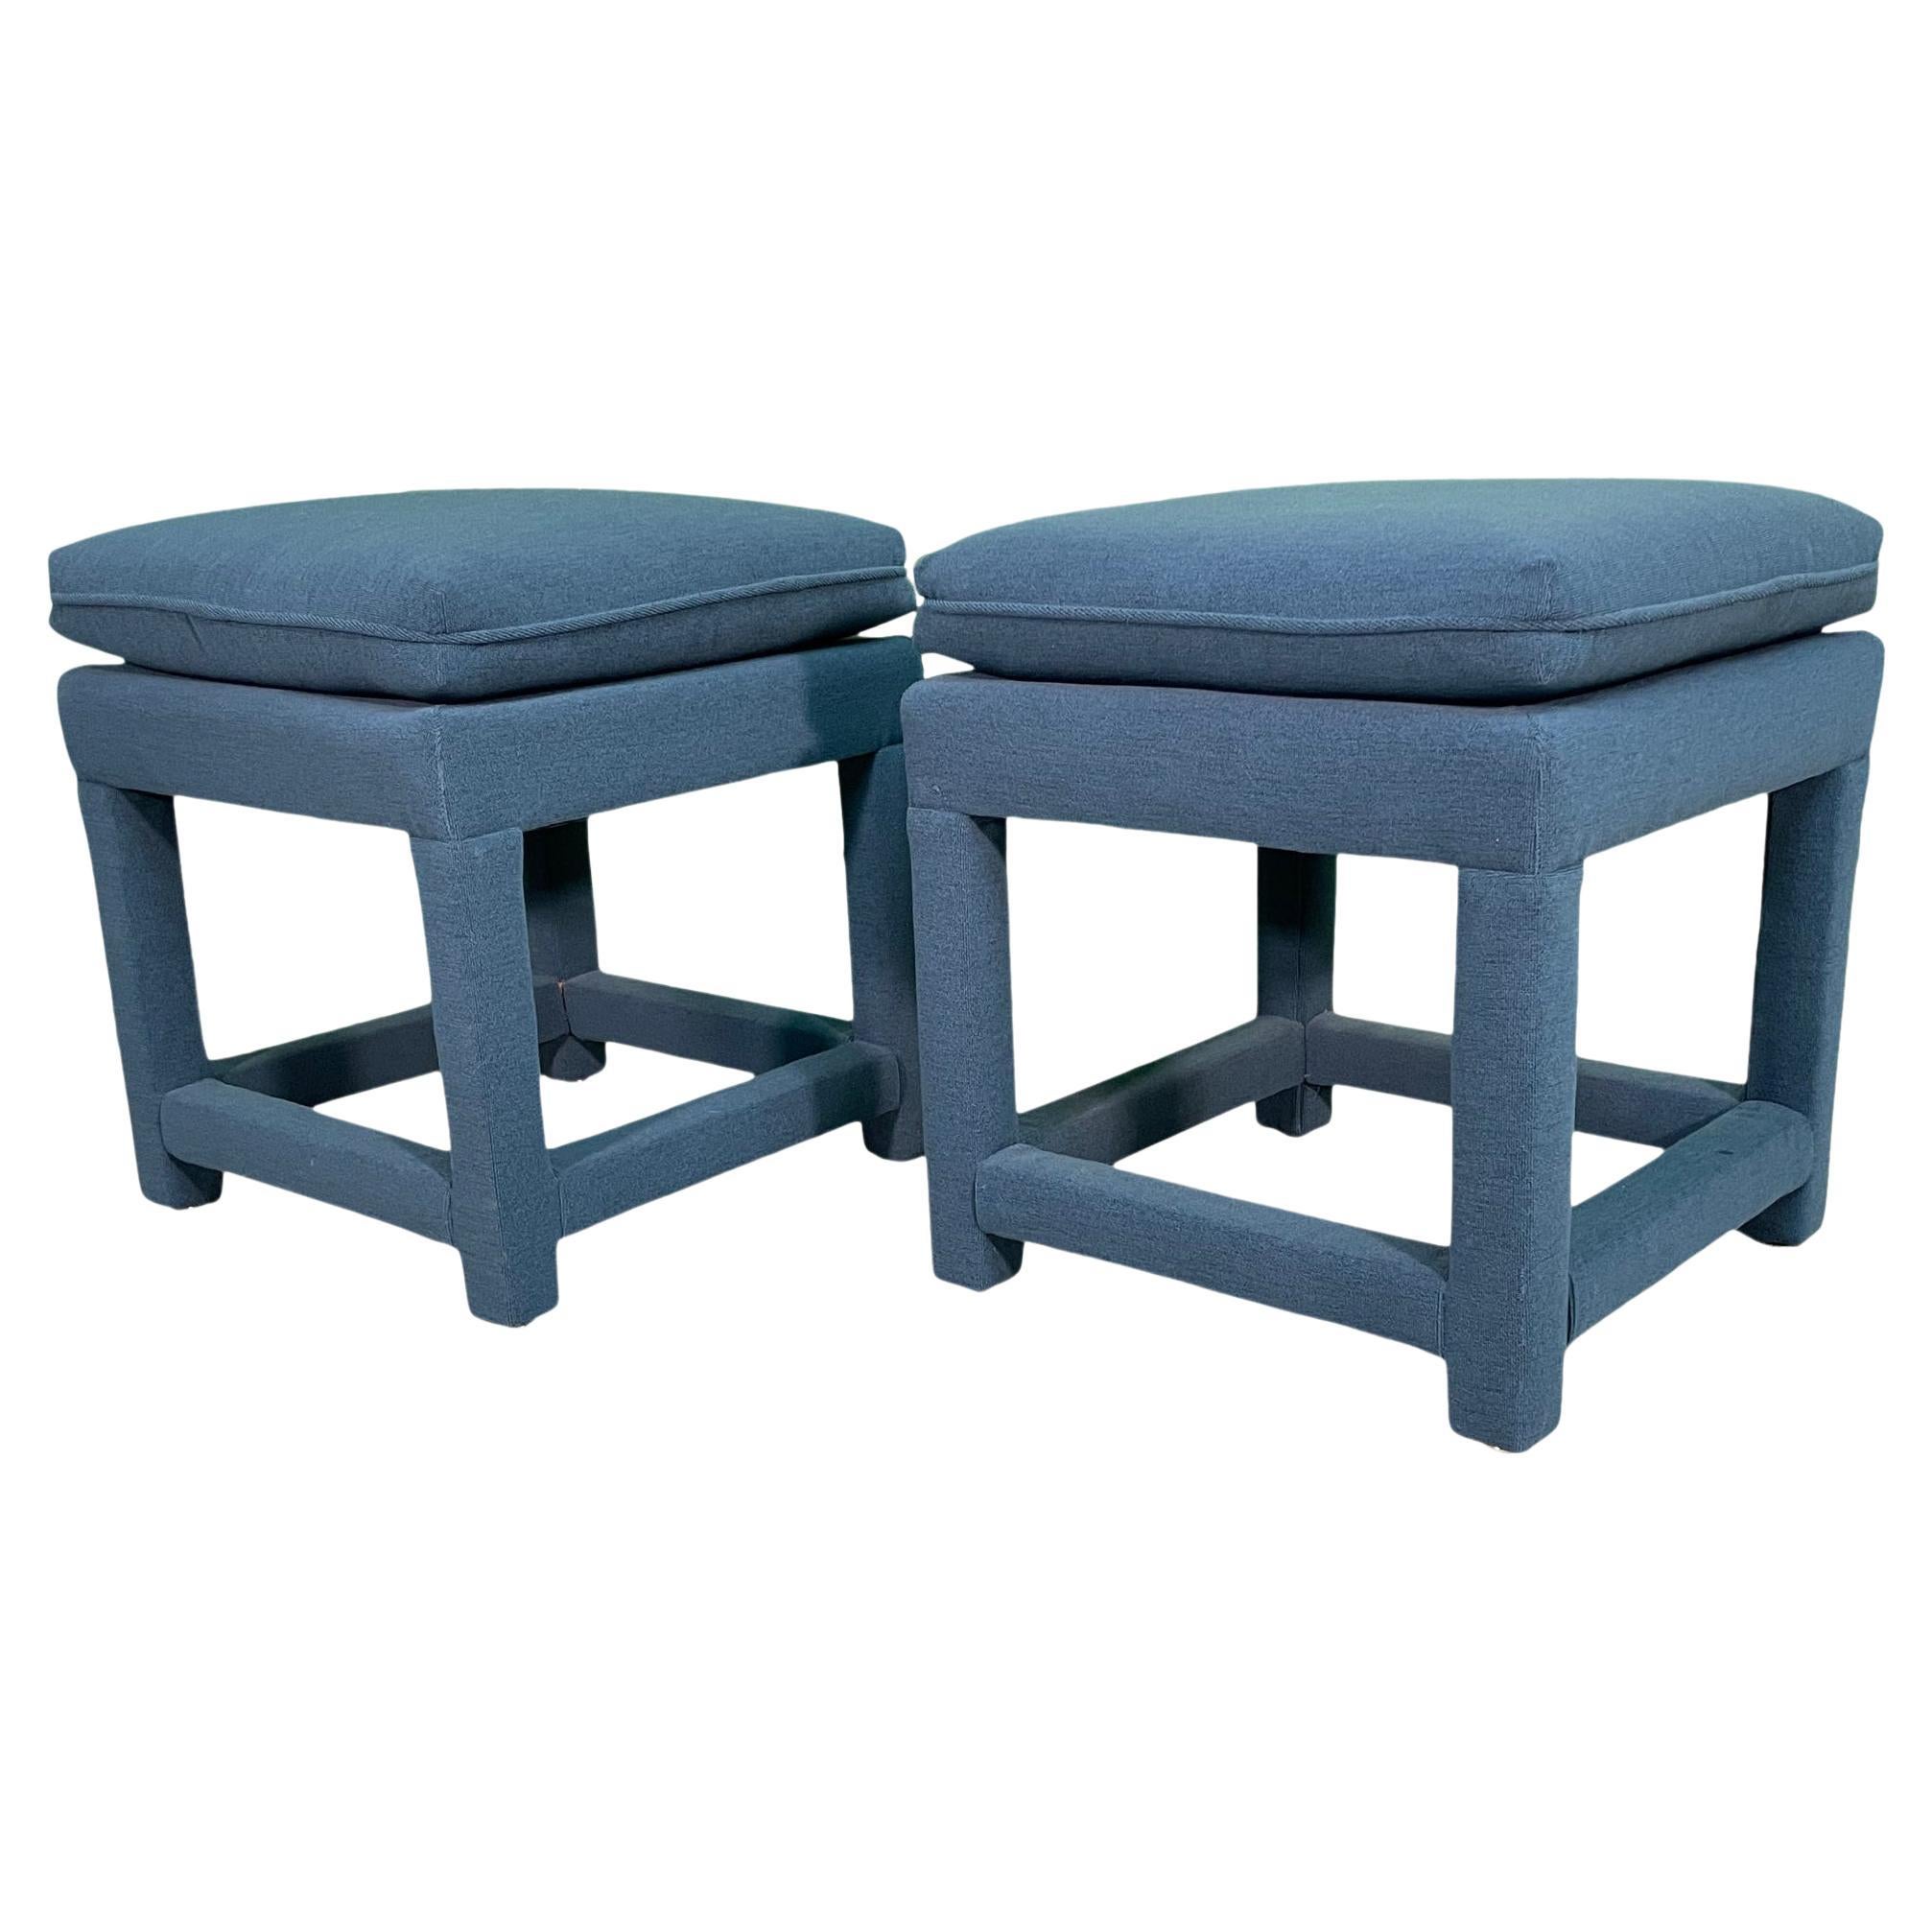 Hollywood Regency Upholstered Footstools, a Pair